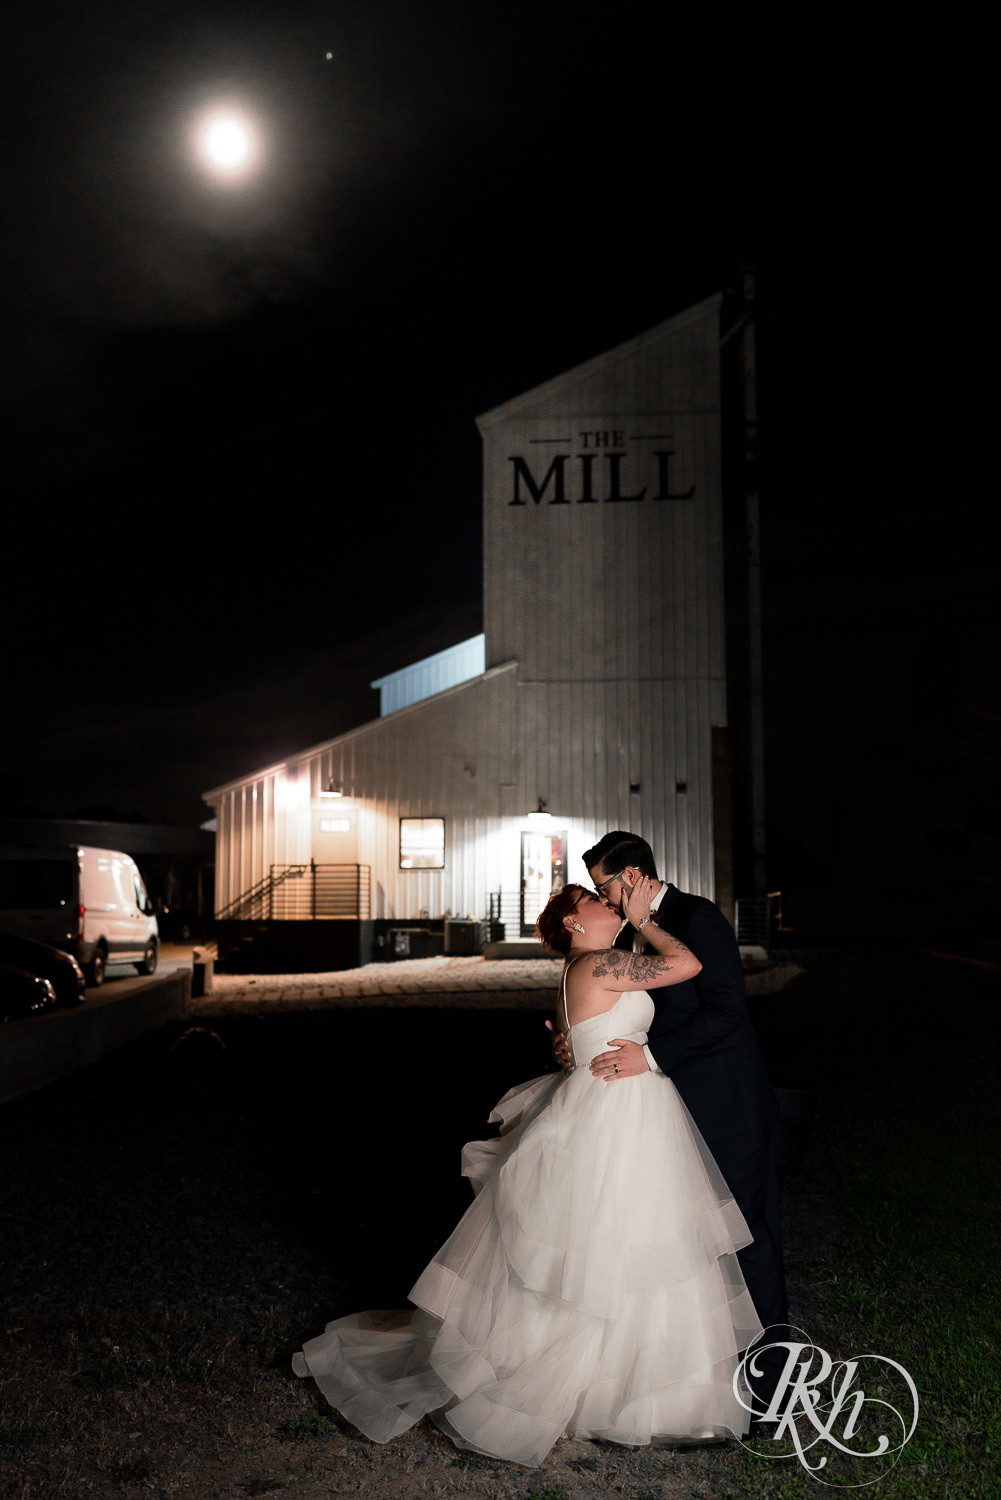 Bride and groom kissing in front of The Mill Events in Chetek, Wisconsin at night with a full moon.